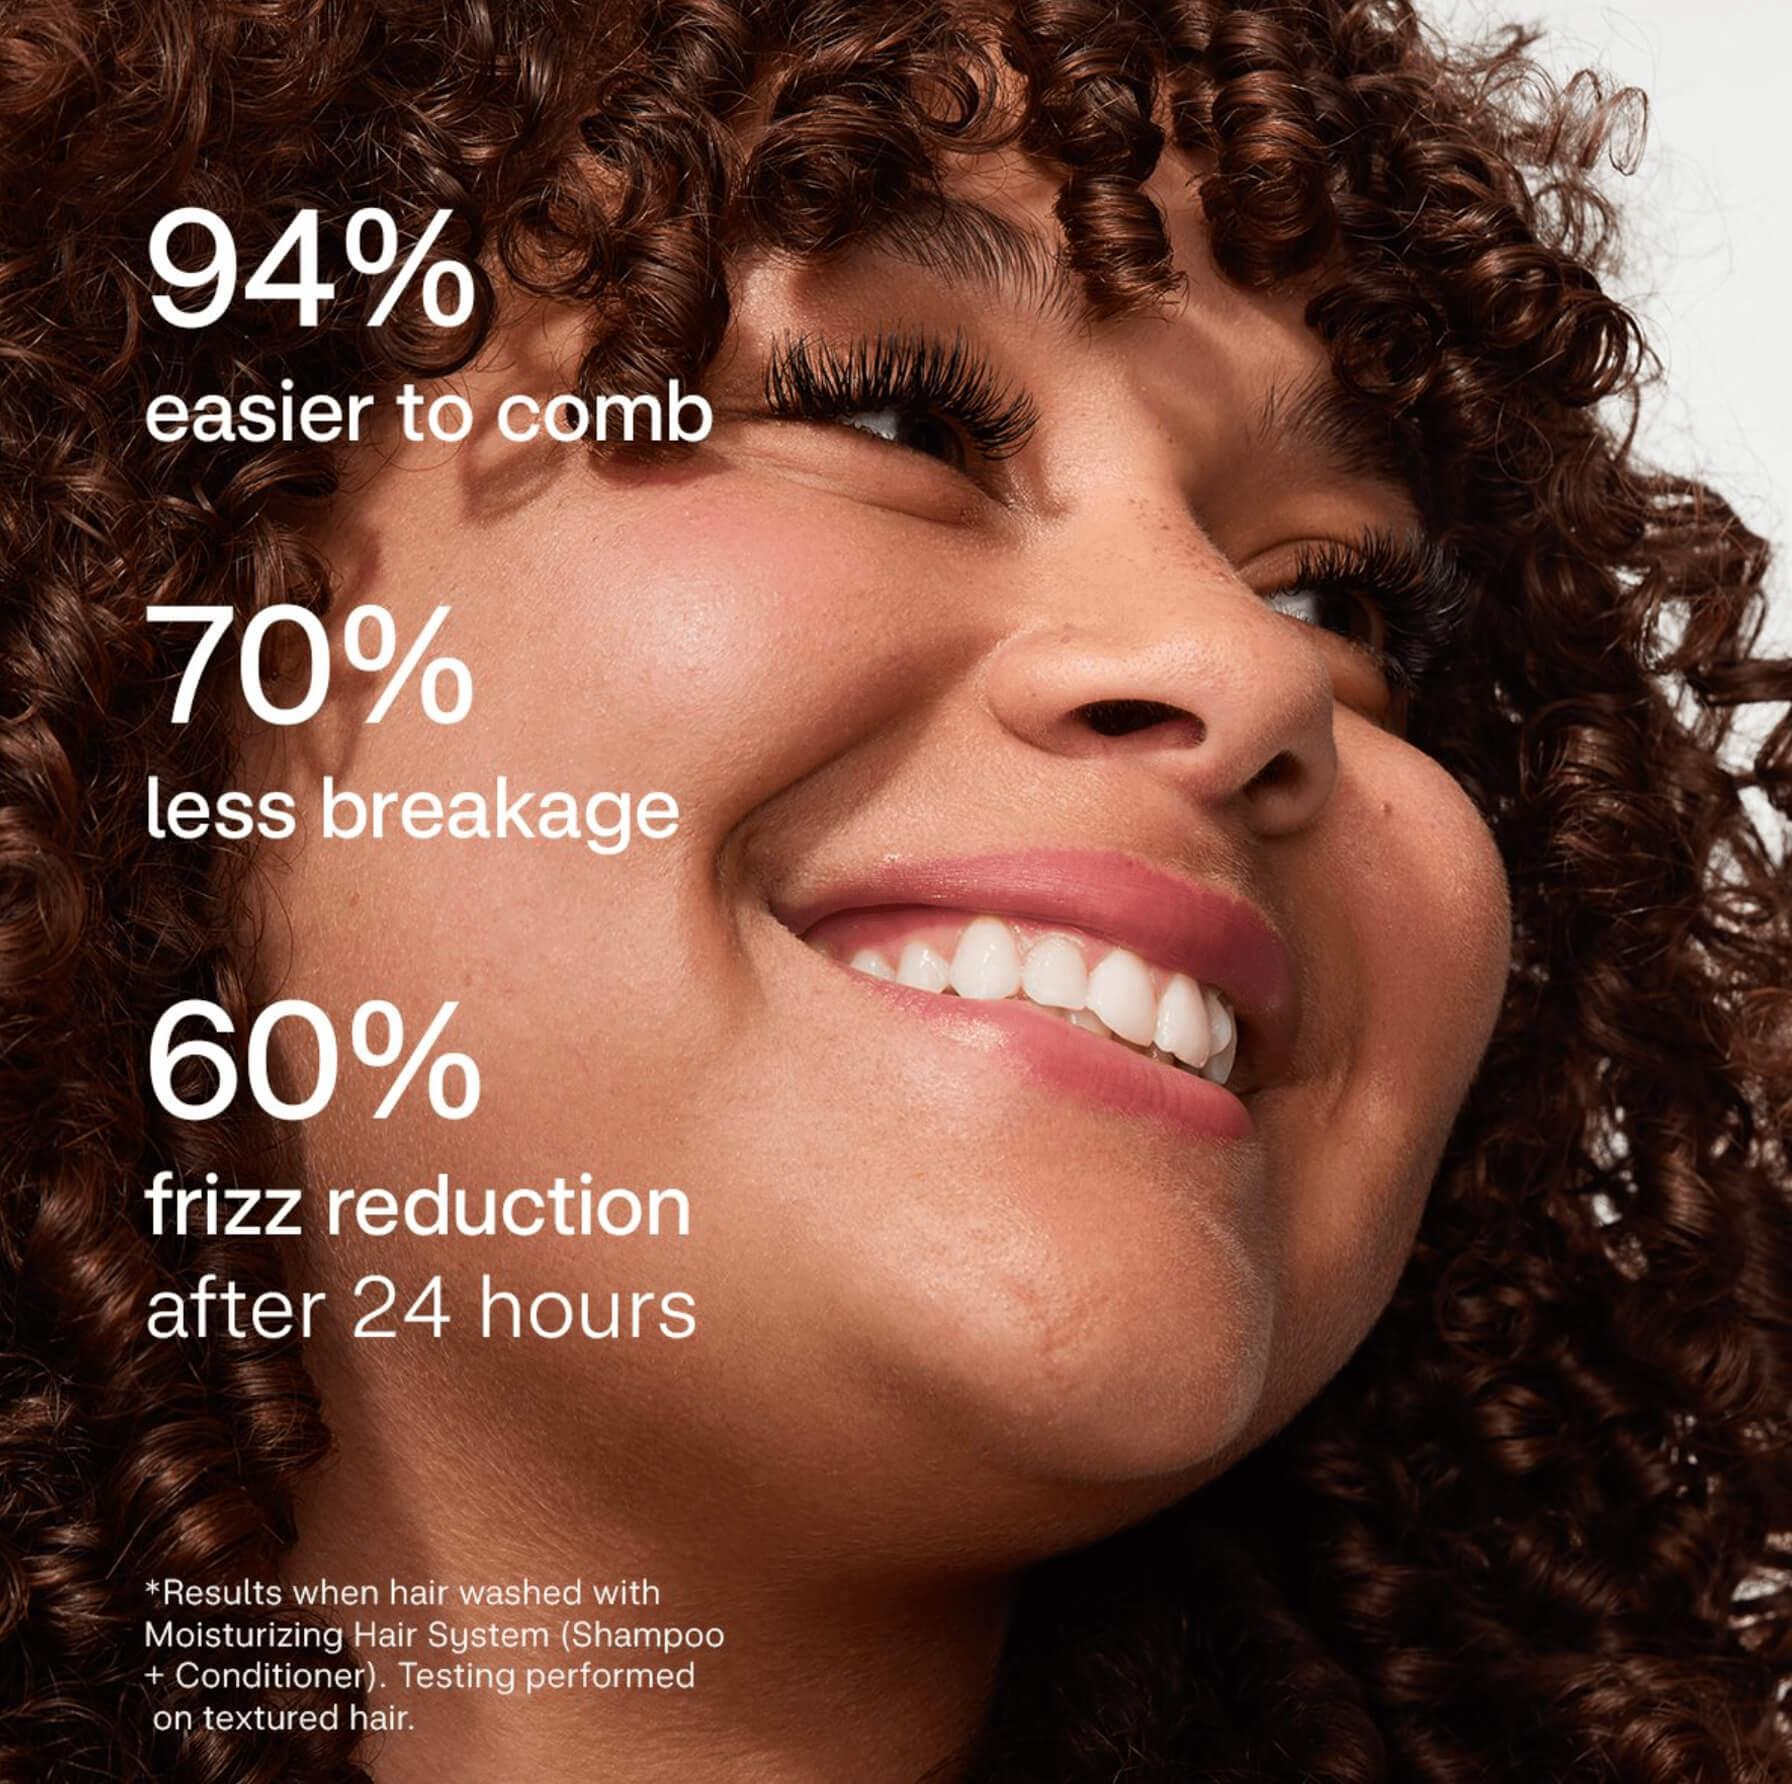 94% easier to comp, 70% less breakage and 60% frizz reduction after 24 hours.